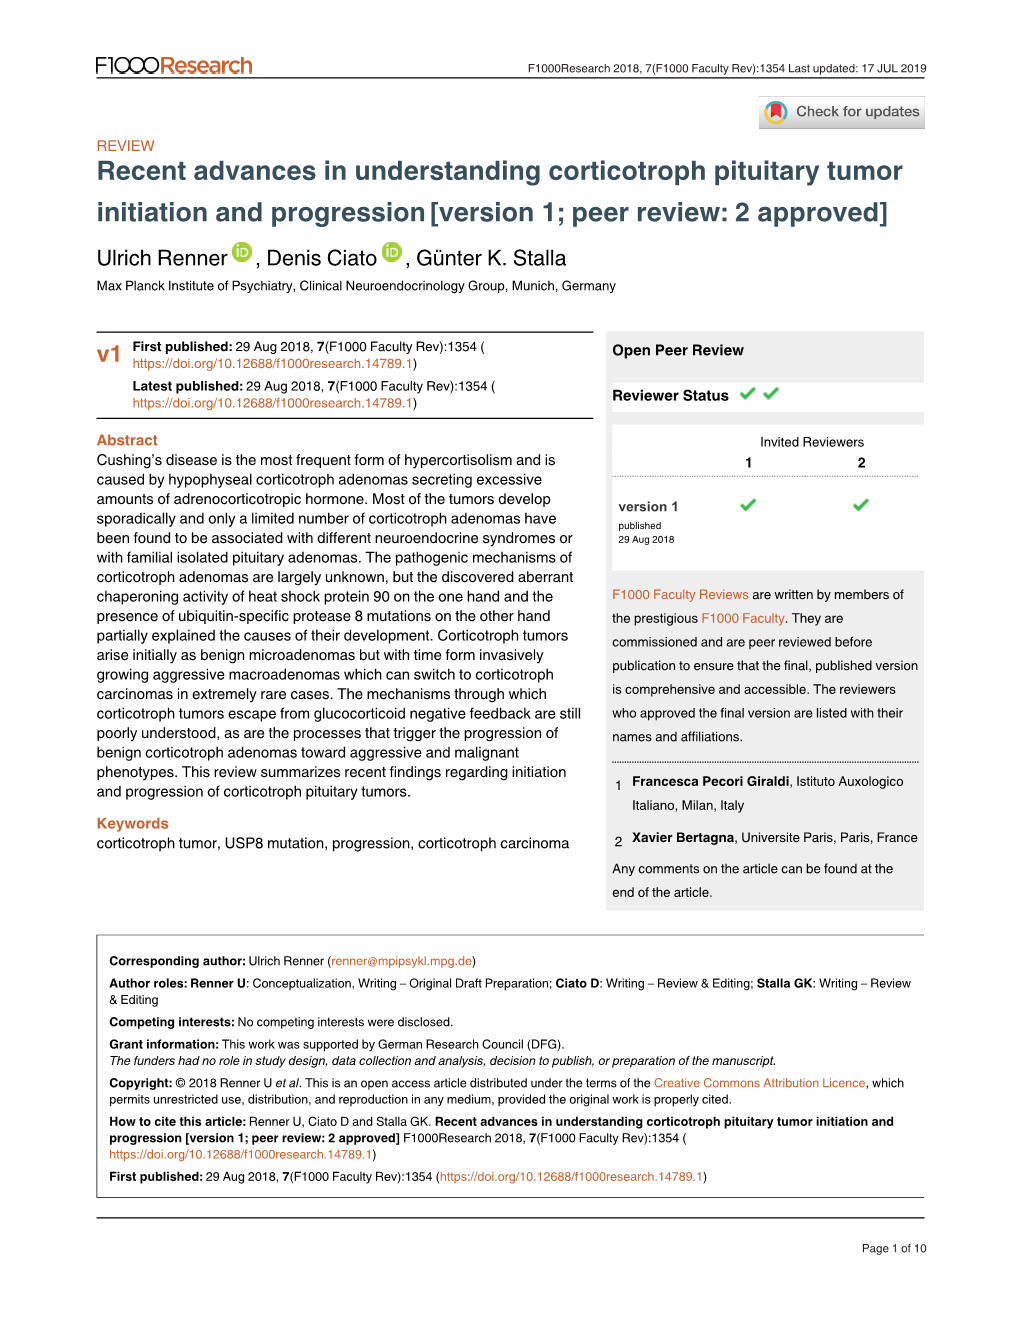 Recent Advances in Understanding Corticotroph Pituitary Tumor Initiation and Progression [Version 1; Peer Review: 2 Approved] Ulrich Renner , Denis Ciato , Günter K